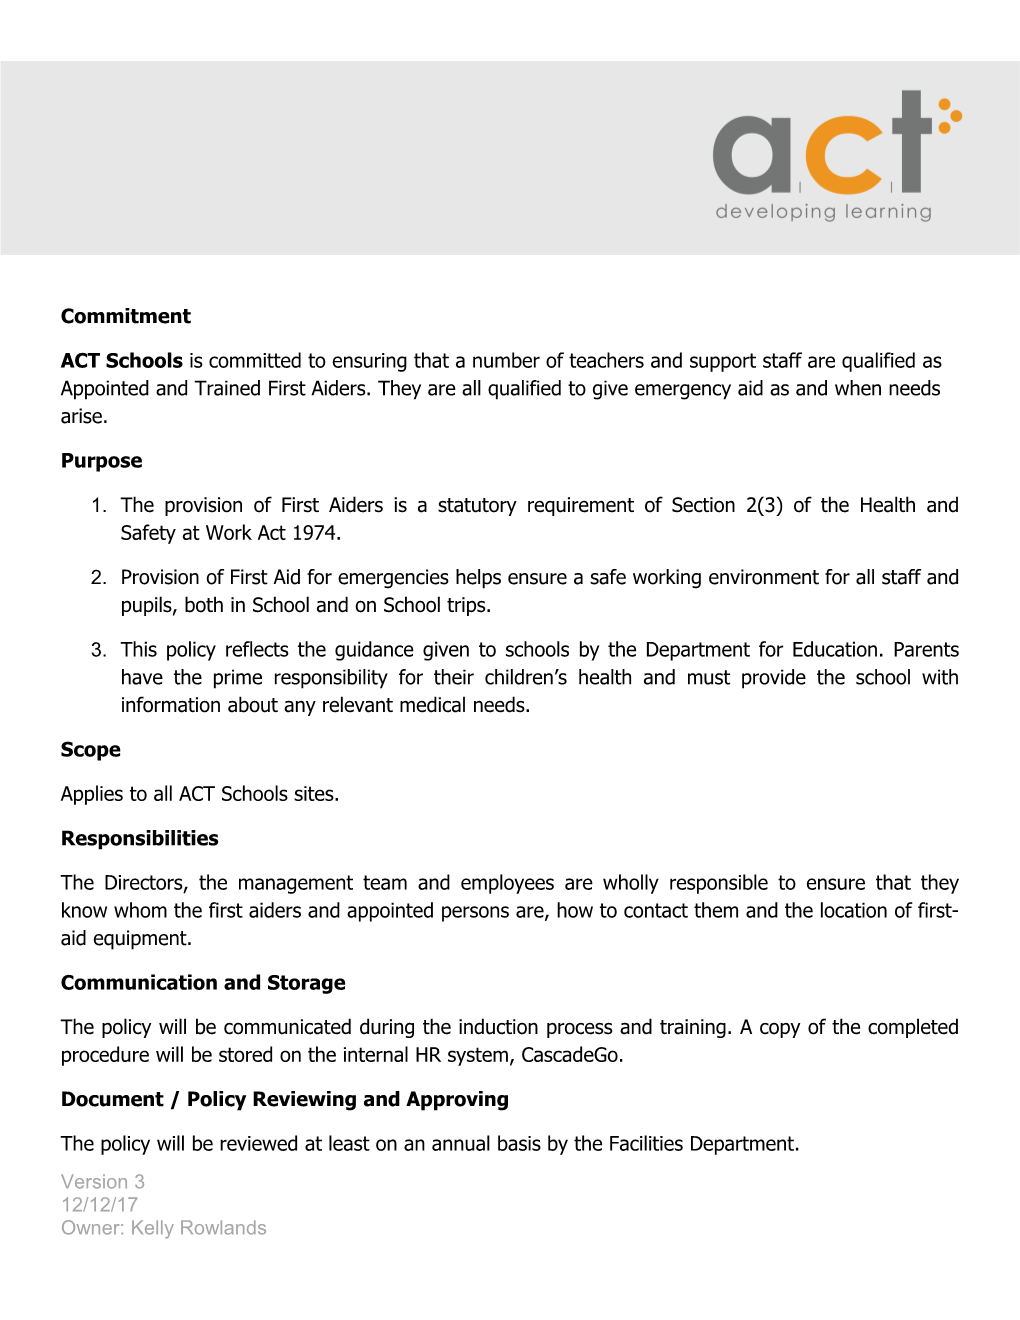 ACT Schools Is Committed to Ensuring That a Number of Teachers and Support Staff Are Qualified